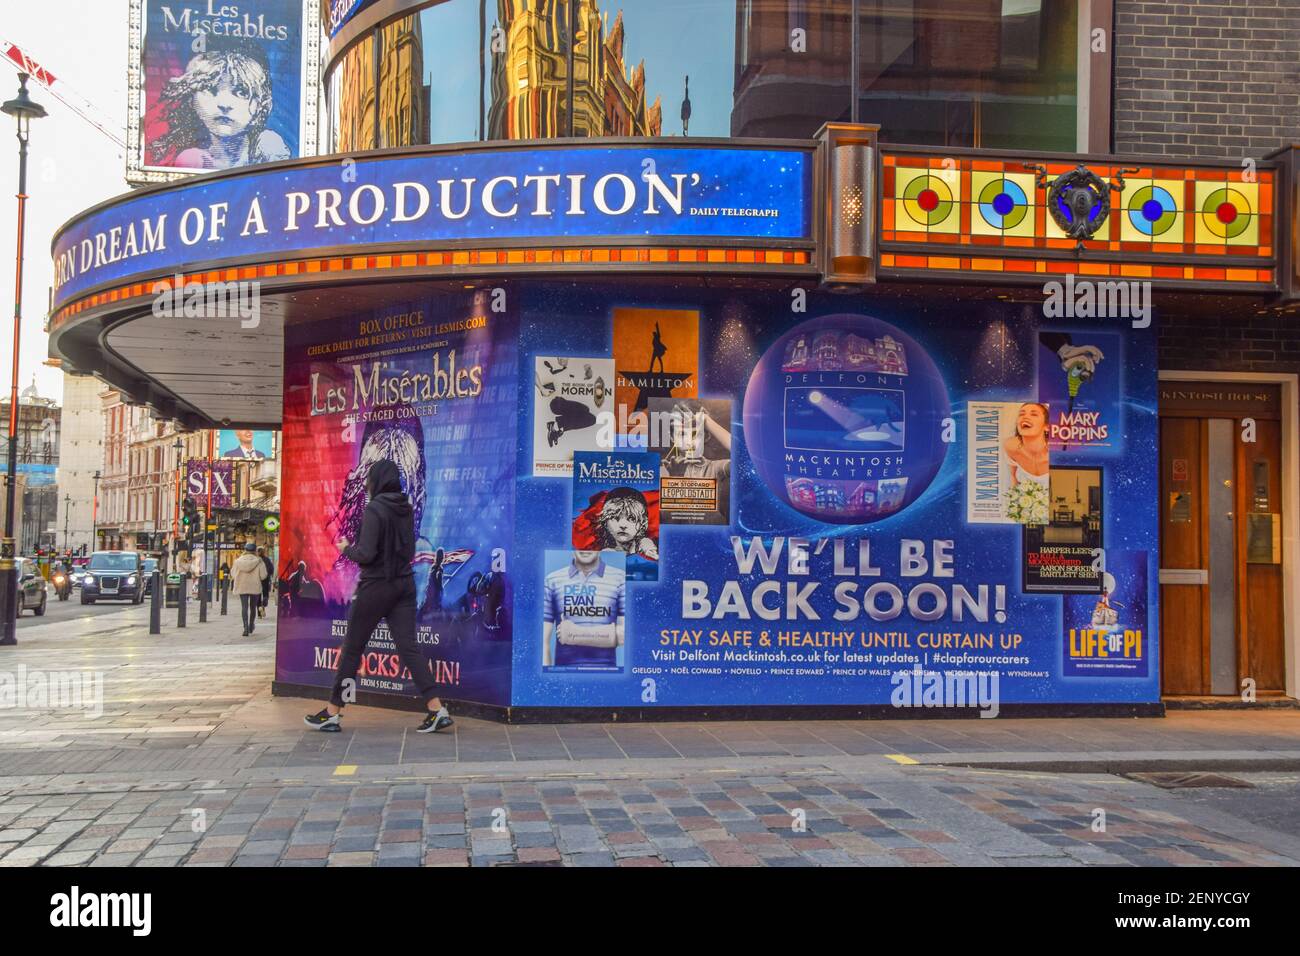 A woman walks past a 'We'll Be Back Soon' sign at Sondheim Theatre on Shaftesbury Avenue, which has been closed for much of the time since the coronavirus pandemic begun. London, United Kingdom February 2021. Stock Photo